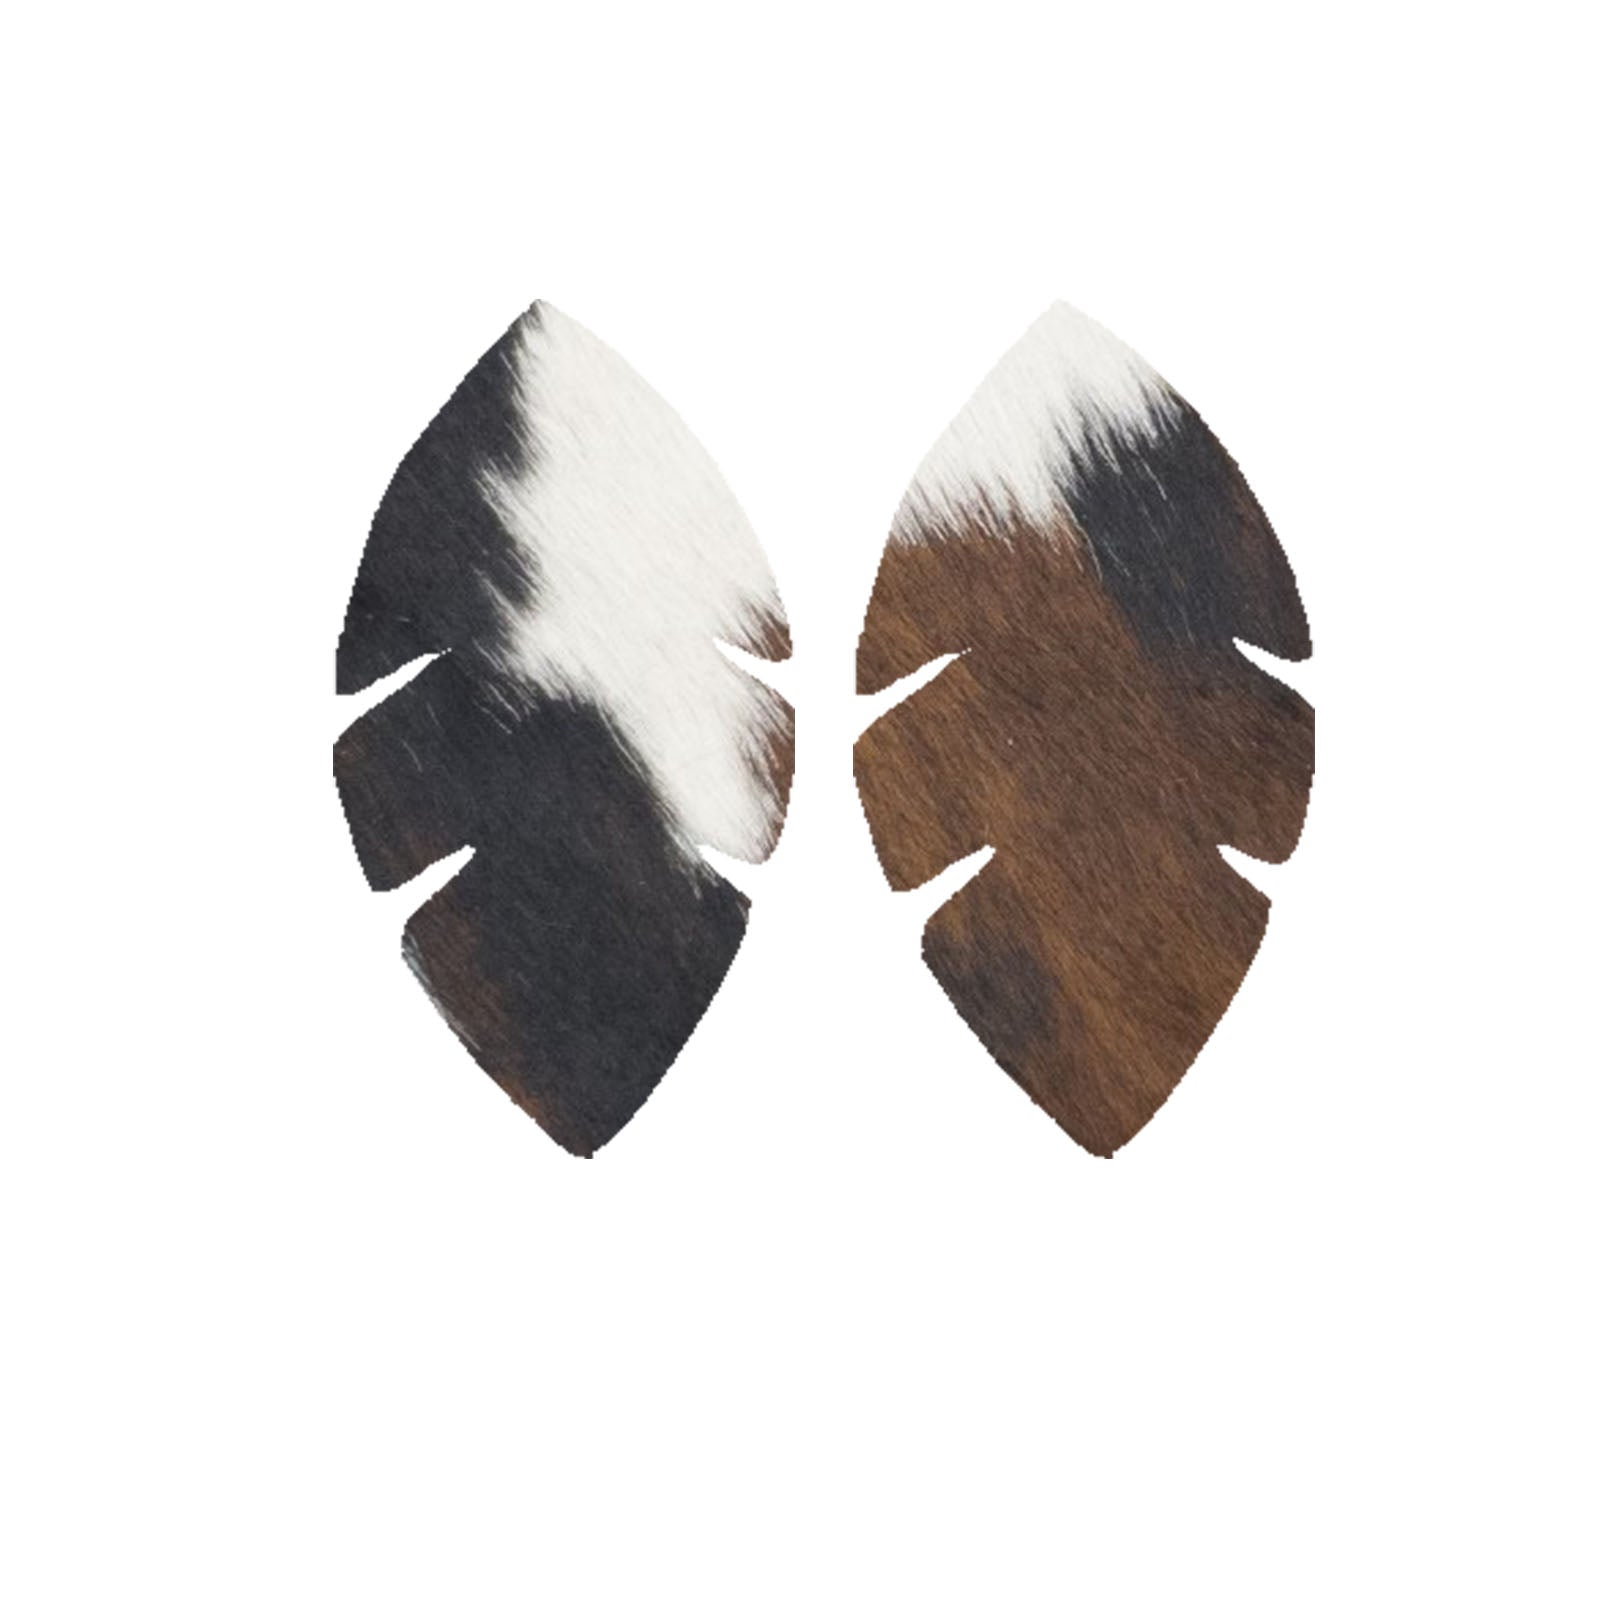 Tri-Colored Black/Brown/Off White Hair On Die Cut Earrings, Palm Leaf | The Leather Guy